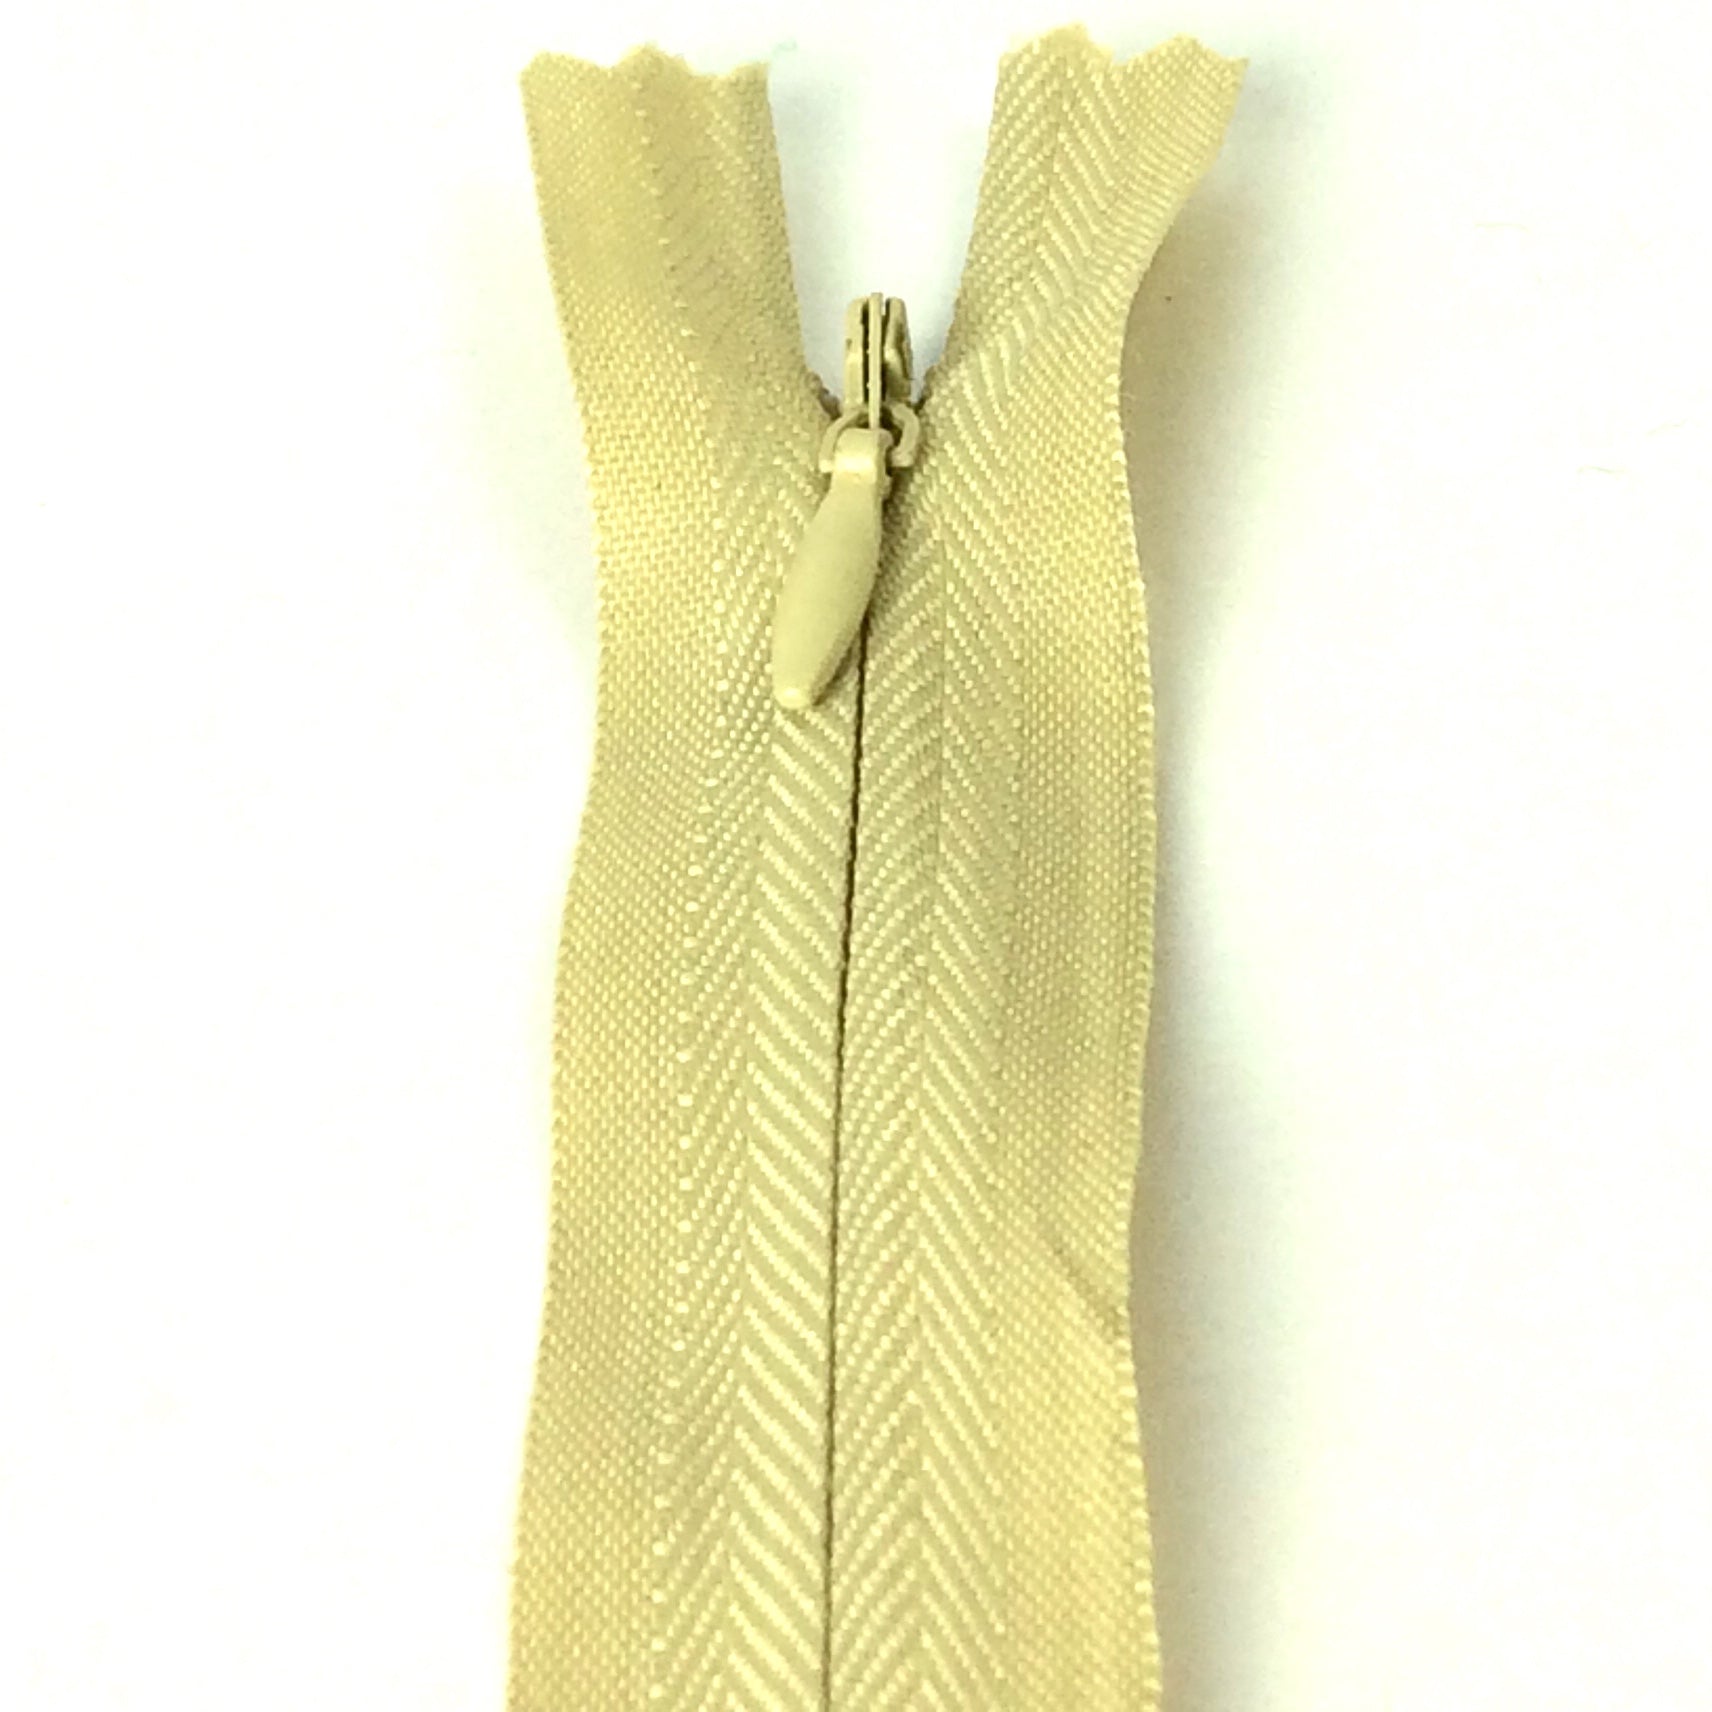 Photo of darker beige invisible or concealed zips available in many different colours and sizes. Great for achieving a professional finish in your products. Invisible zippers are perfect for dressmaking, cushions, crafts, etc., where you don't want your zipper showing. Installing them can be tricky without the right foot on your machine; a normal zipper foot is for installing standard zippers, while you will need an invisible zipper foot for a professional result